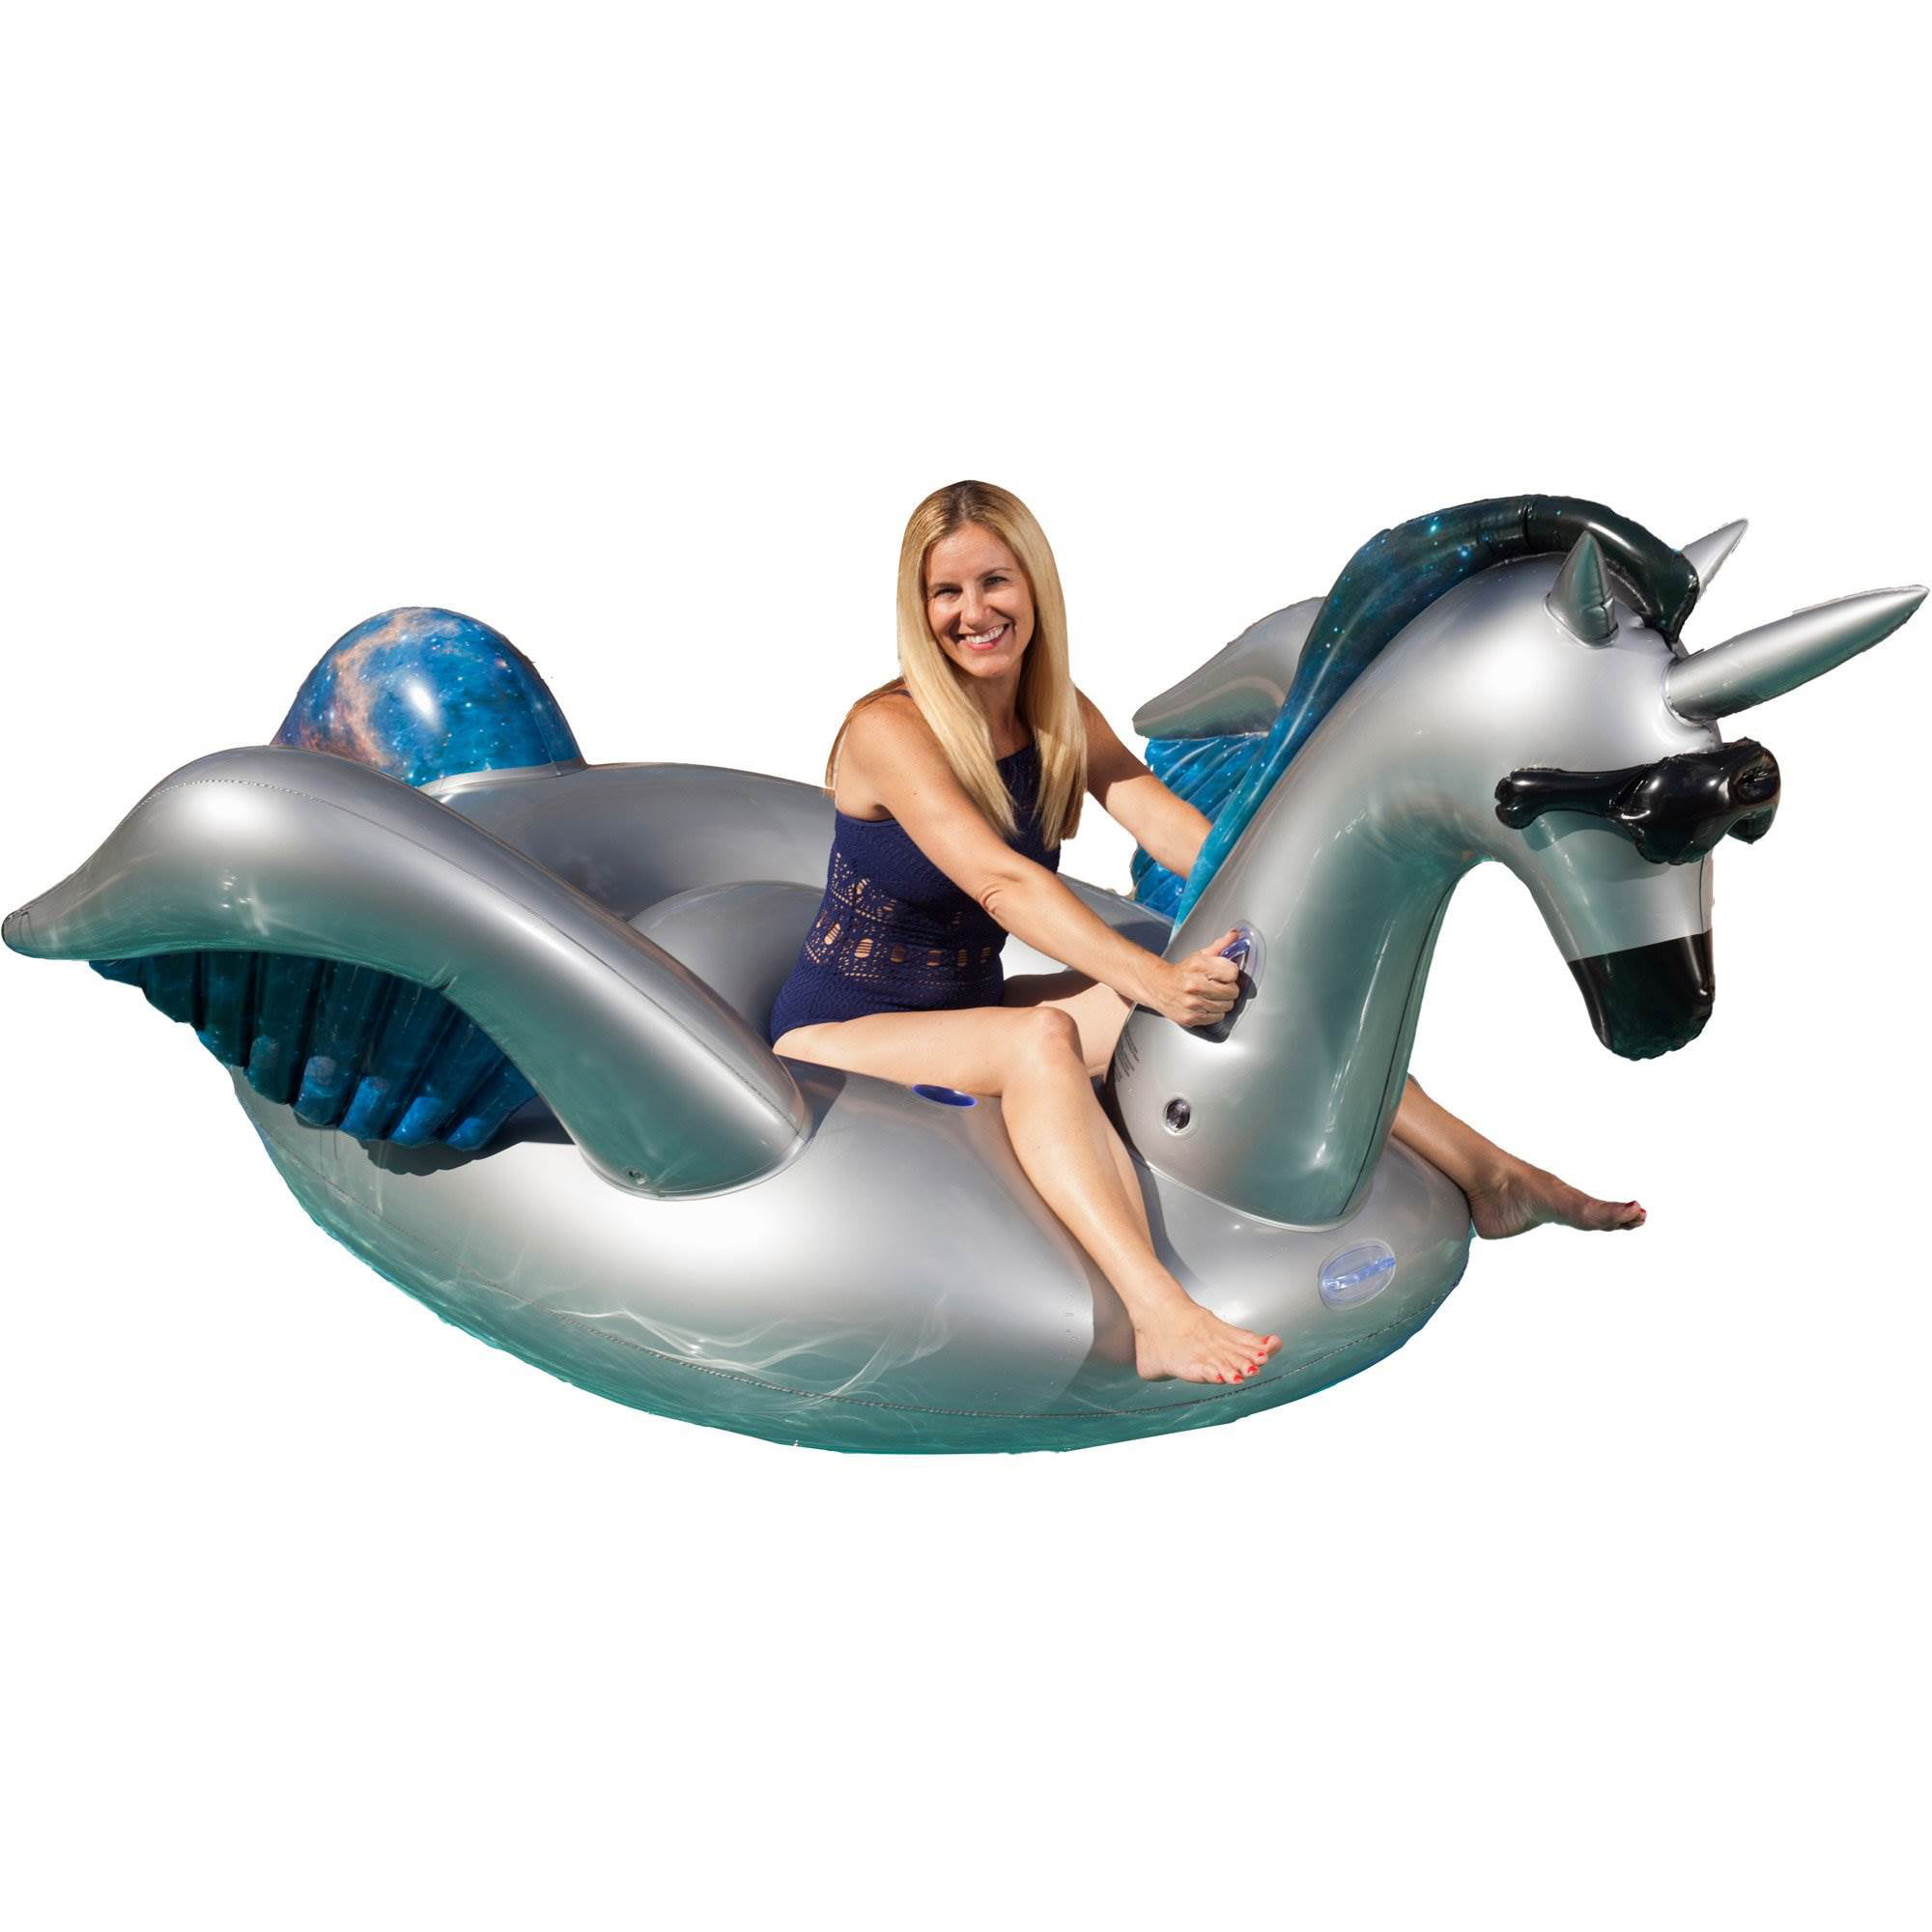 GAME Giant Inflatable Ride-On Rainbow Alicorn Unicorn Pool Float w/ Cup Holders 